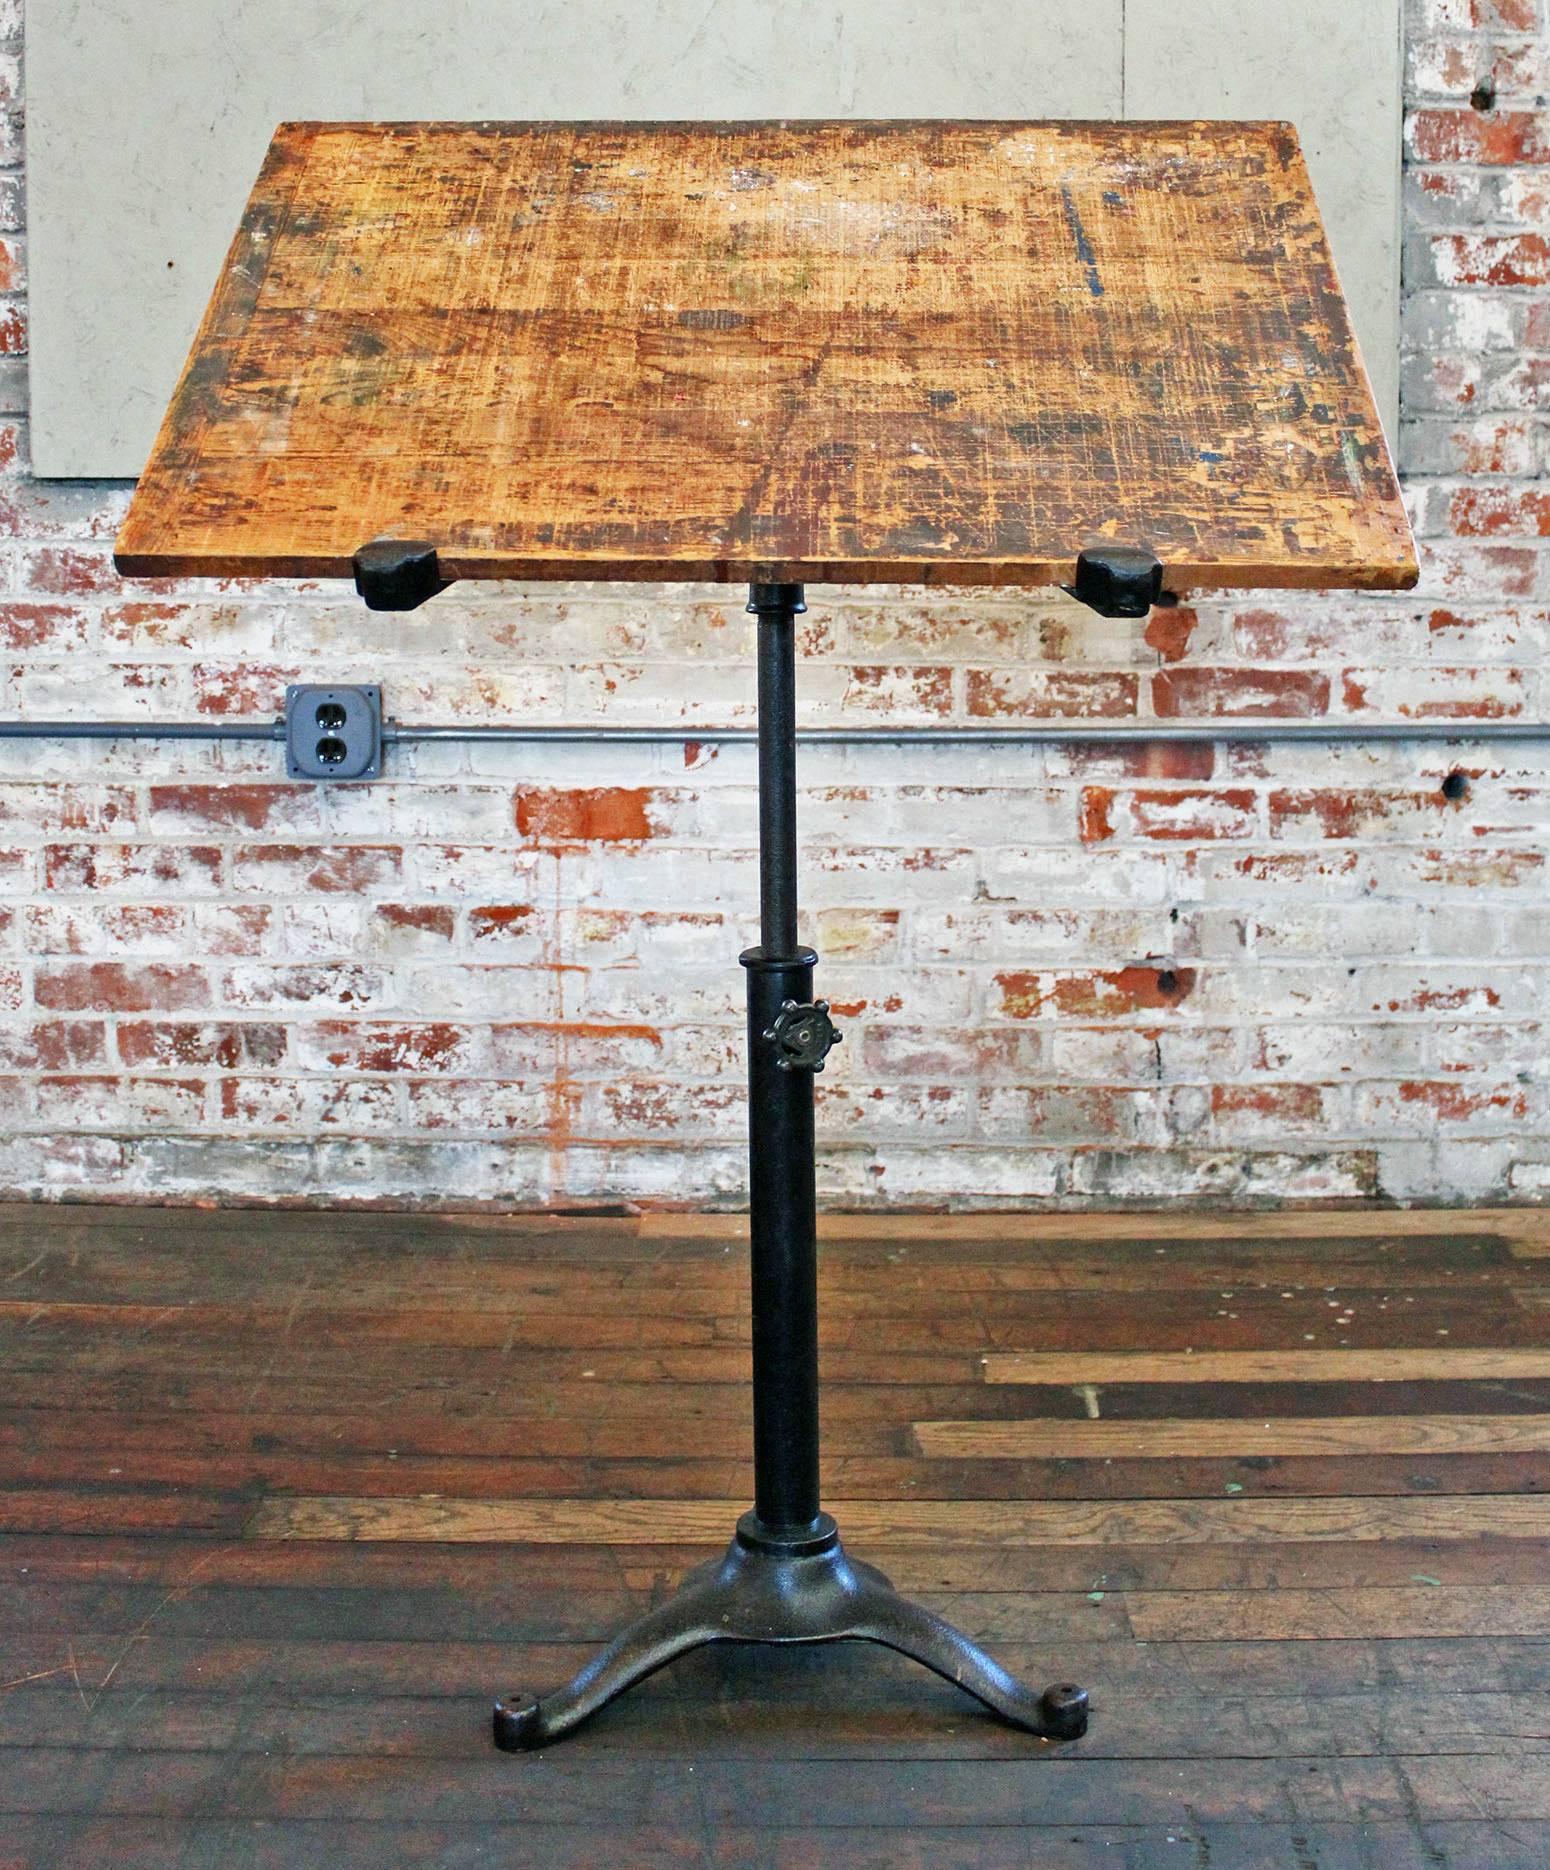 Cast iron and wood Industrial vintage adjustable tilt top artist, drafting table, pedestal music stand, stamped "Artists League of Pittsburgh PA." The wooden top measures 31" x 23" x 3/4". Overall height is adjustable from